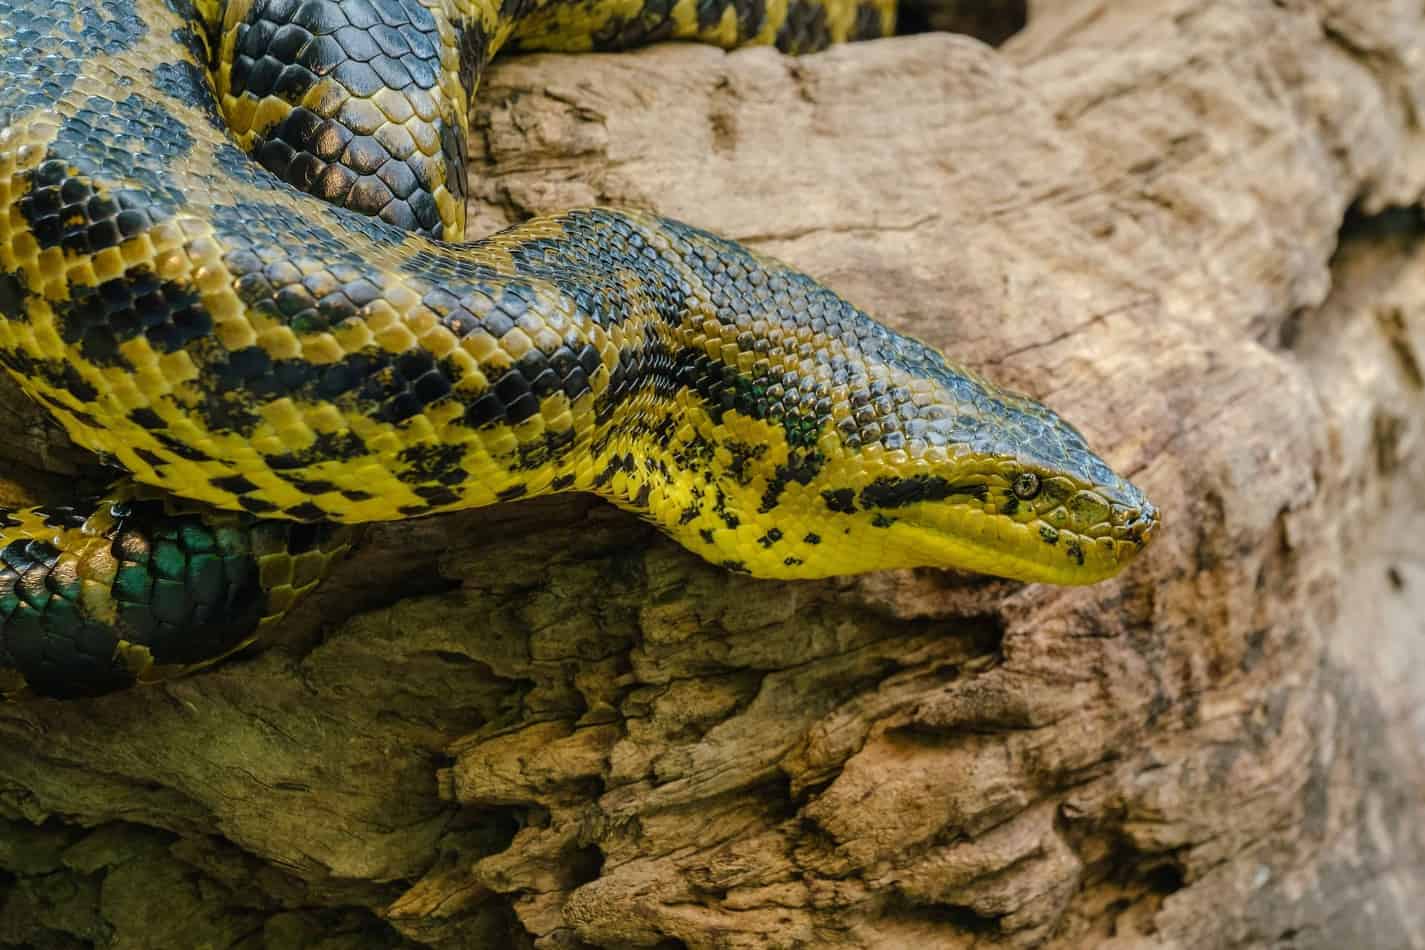 green anaconda not a great pet The Biggest Snake in the World (with Facts and Pictures)